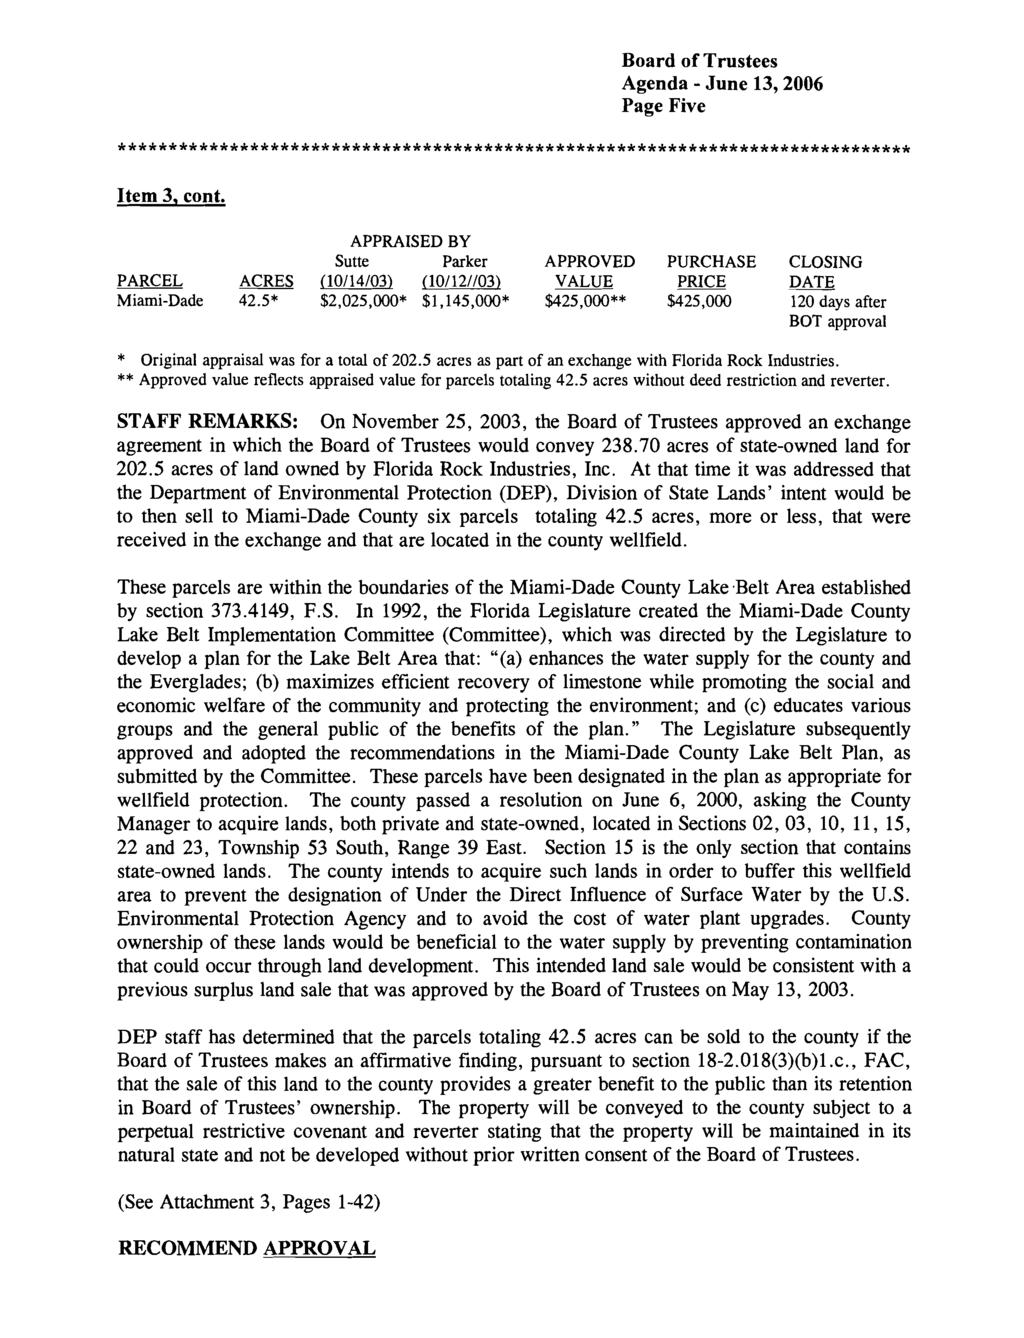 Page Five Item 3, cont. APPRAISED BY Sutte Parker APPROVED PURCHASE CLOSING PARCEL ACRES [10/14/03) [lo/ 12//03) VALUE PRICE DATE Miami-Dade 42.